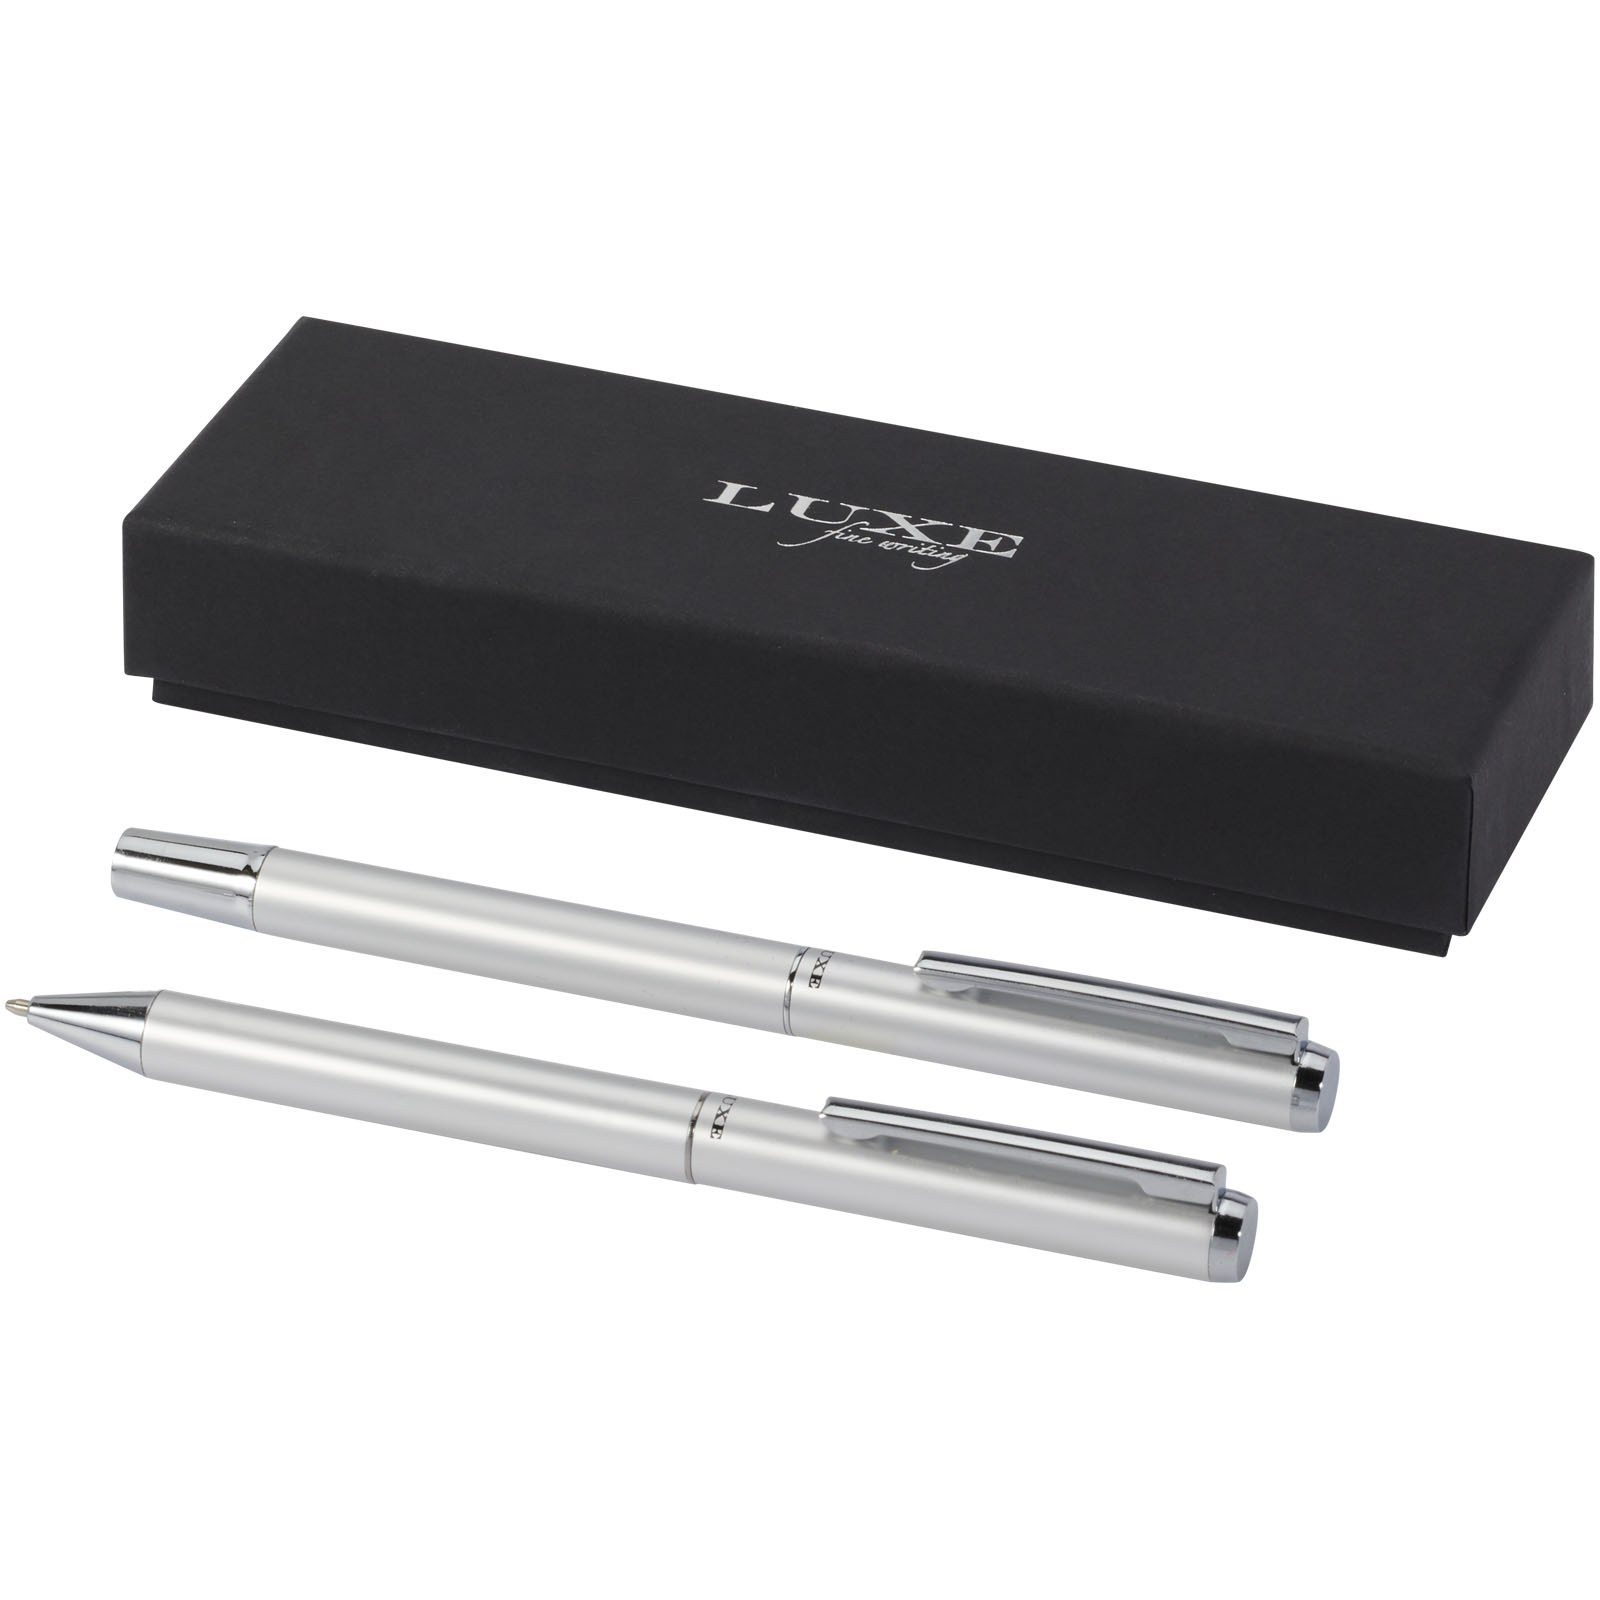 Pens & Writing - Lucetto recycled aluminium ballpoint and rollerball pen gift set